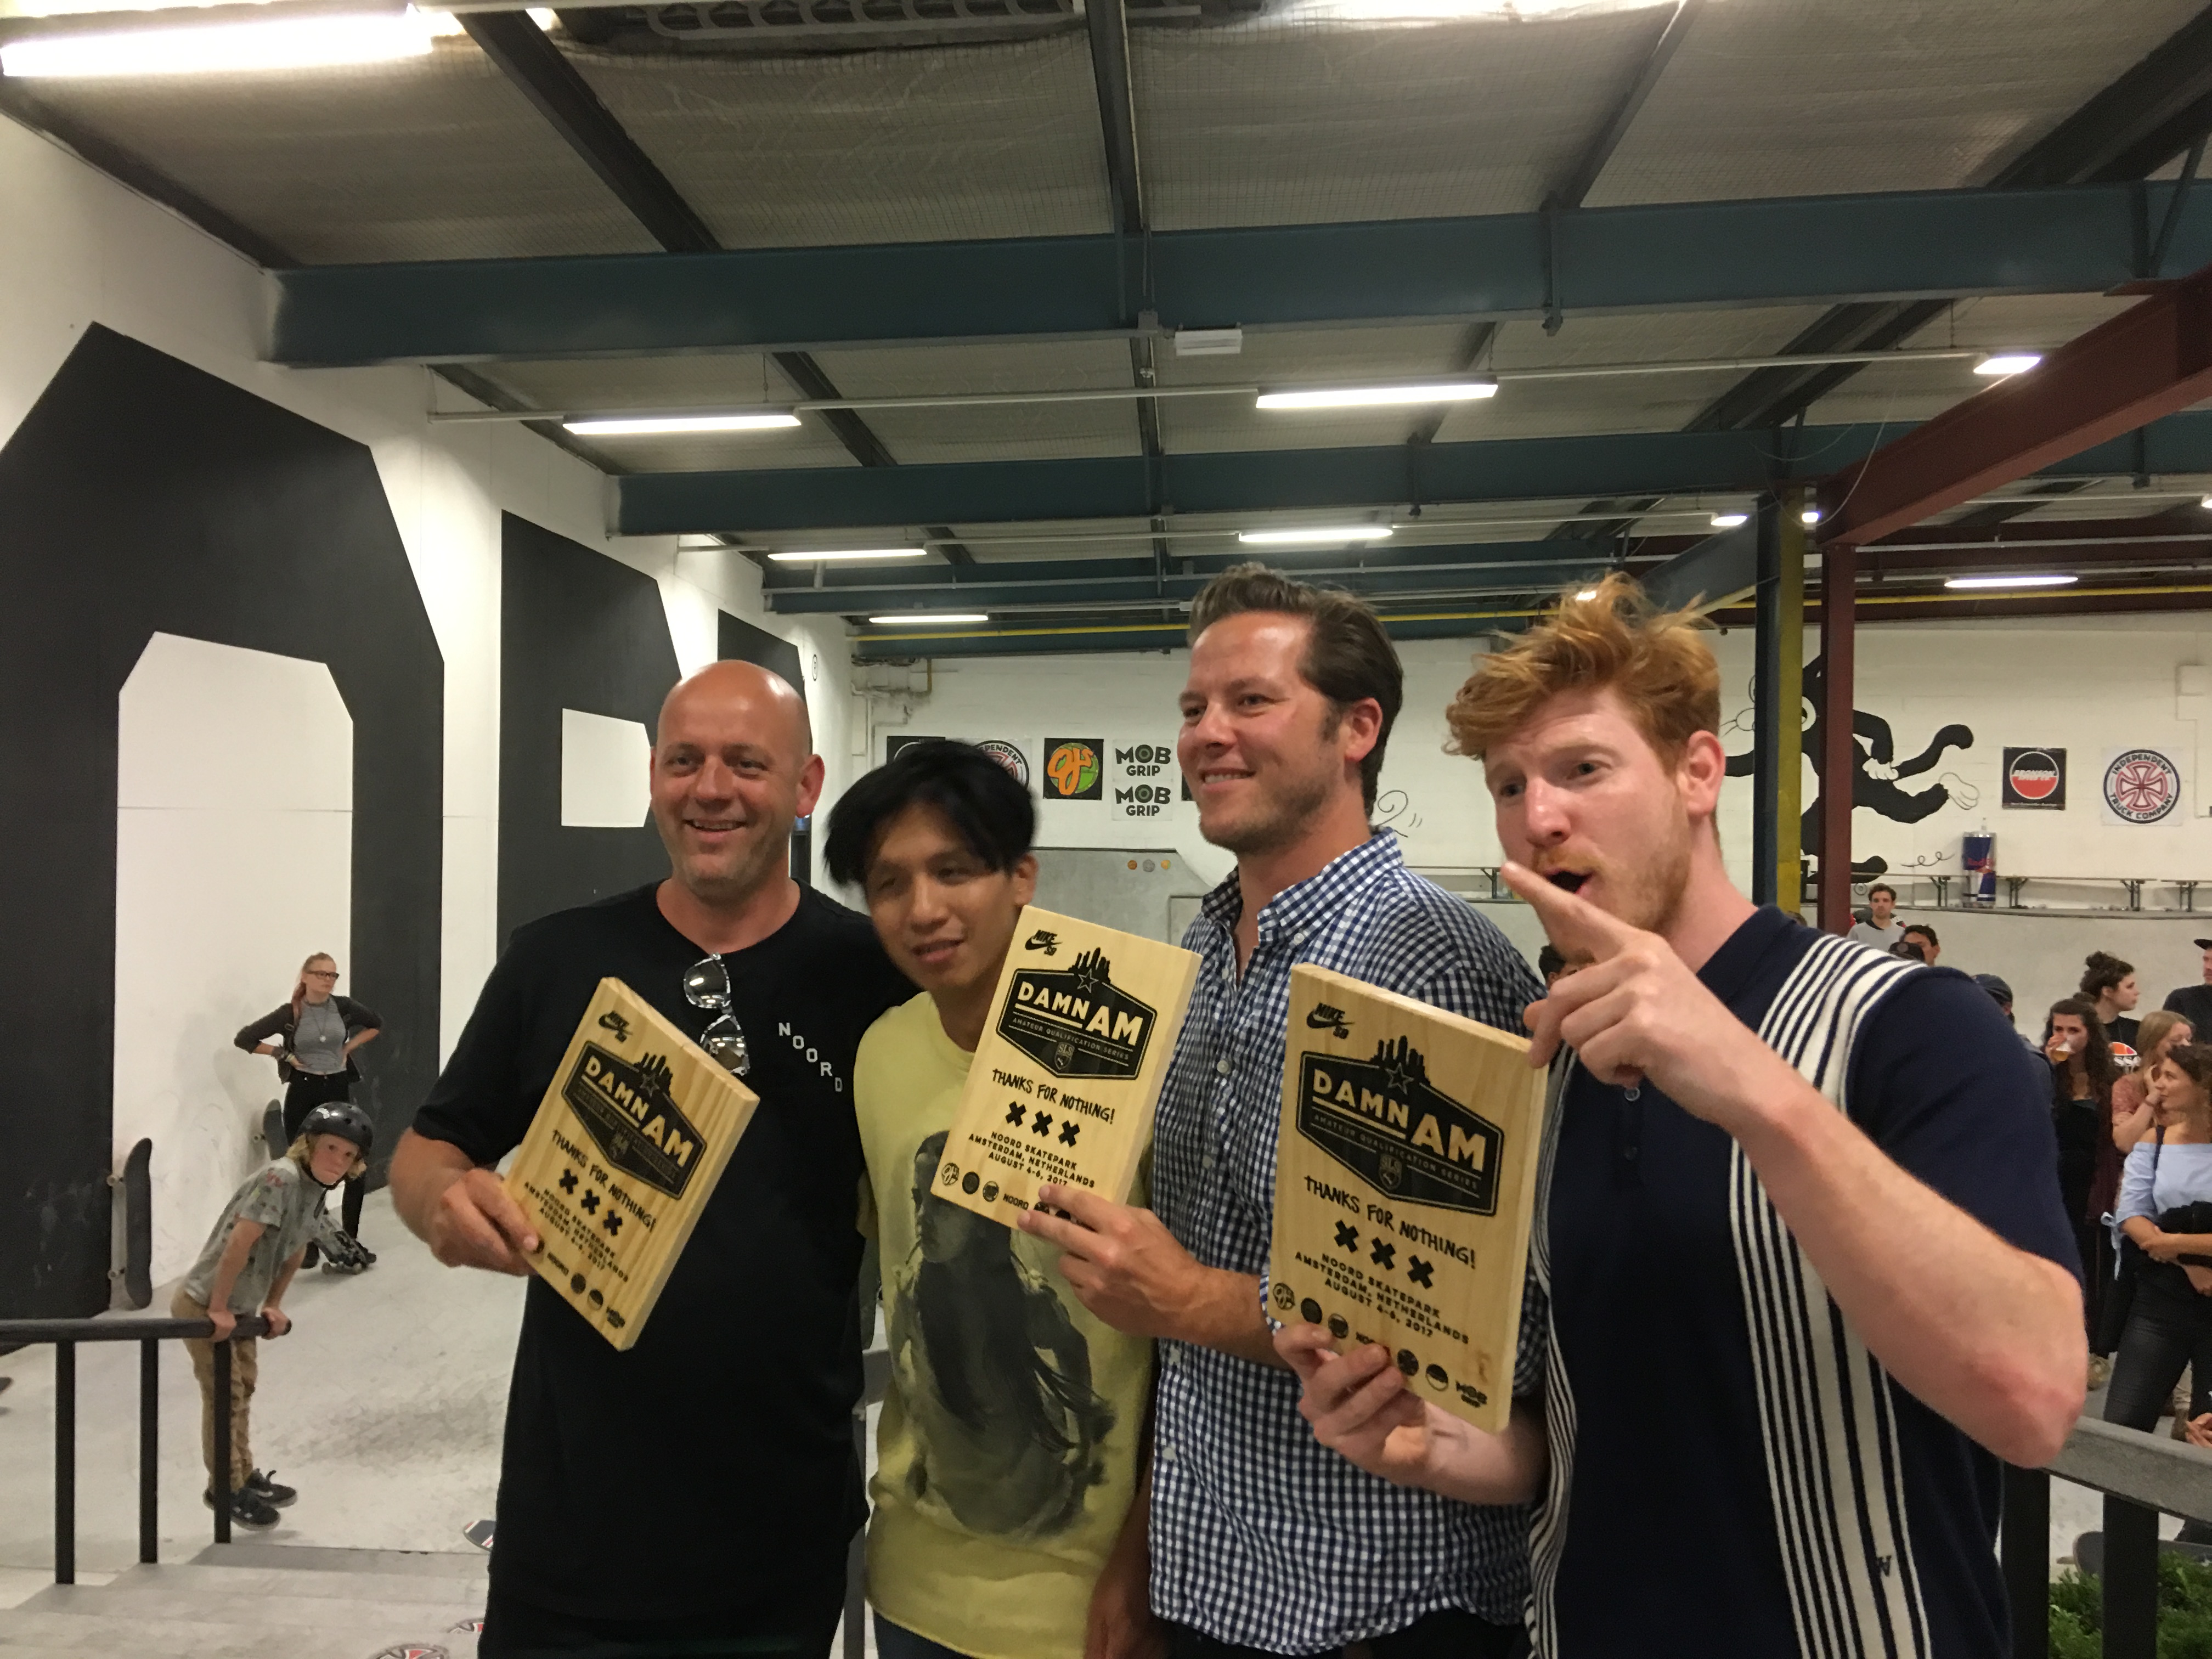 Owners of Amsterdam Skatepark ALSO WON !!! 